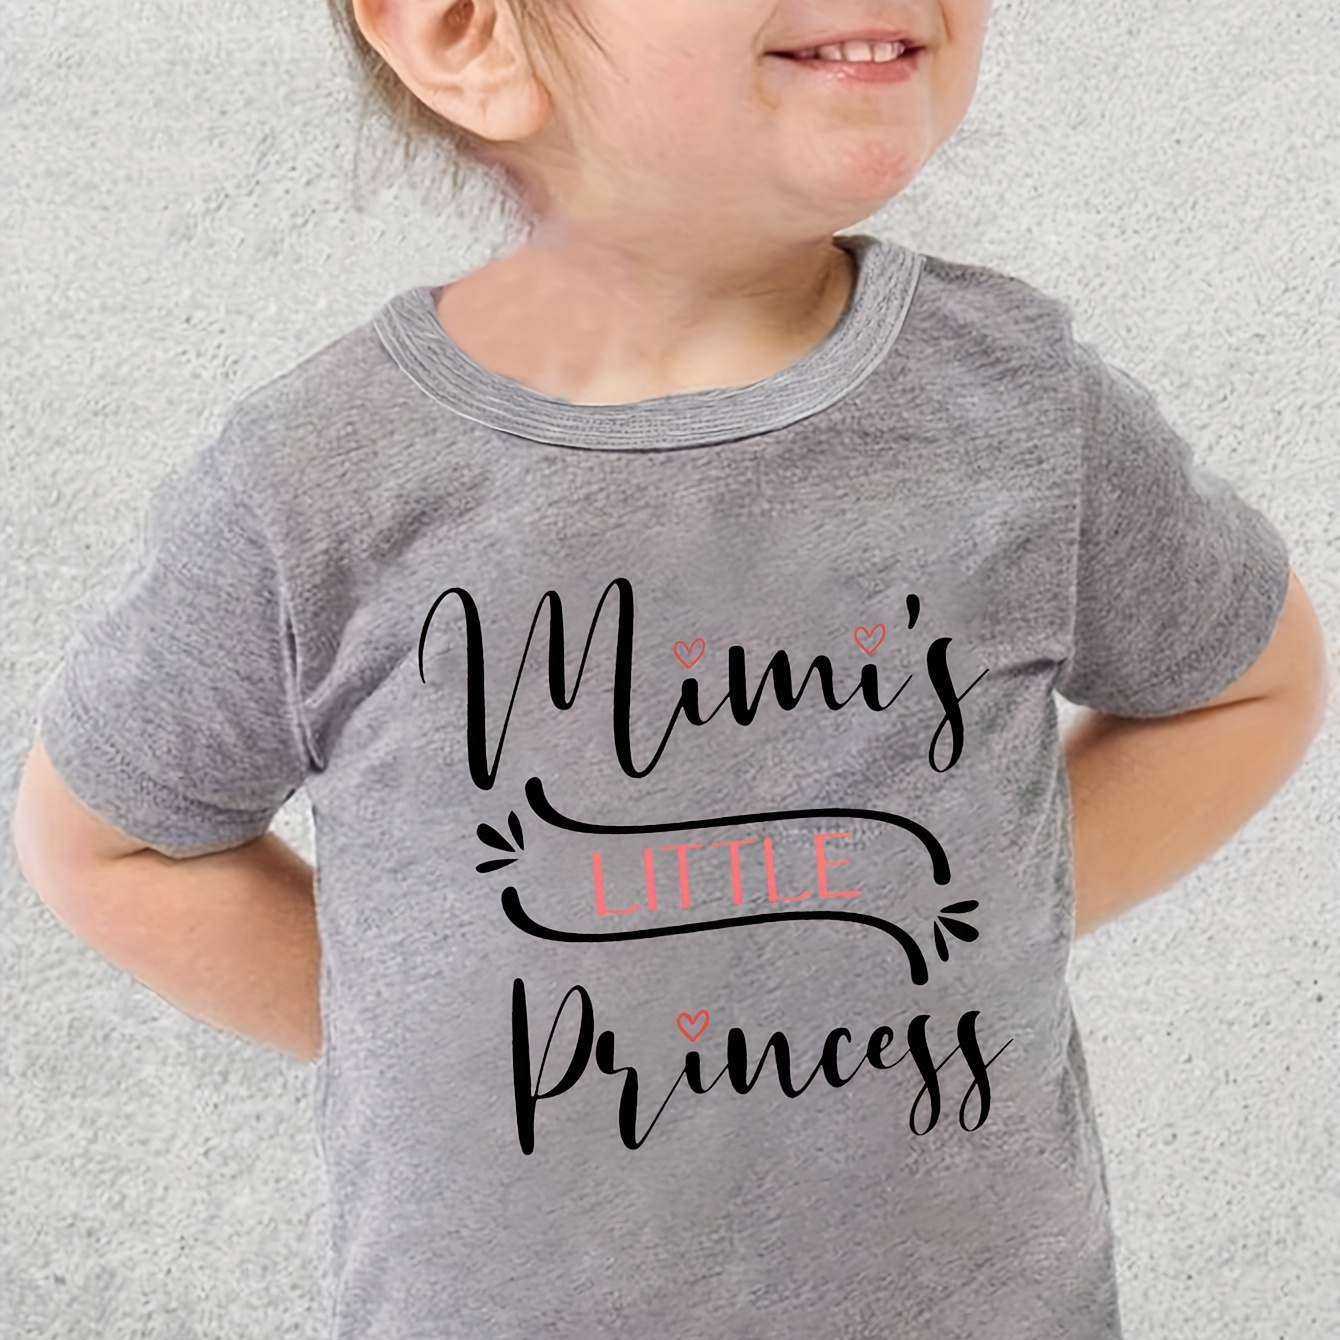 

Graffiti Mimi's Little Princess Print, Girls' Casual Crew Neck Short Sleeve T-shirt, Comfy Top Clothes For Spring And Summer For Outdoor Activities